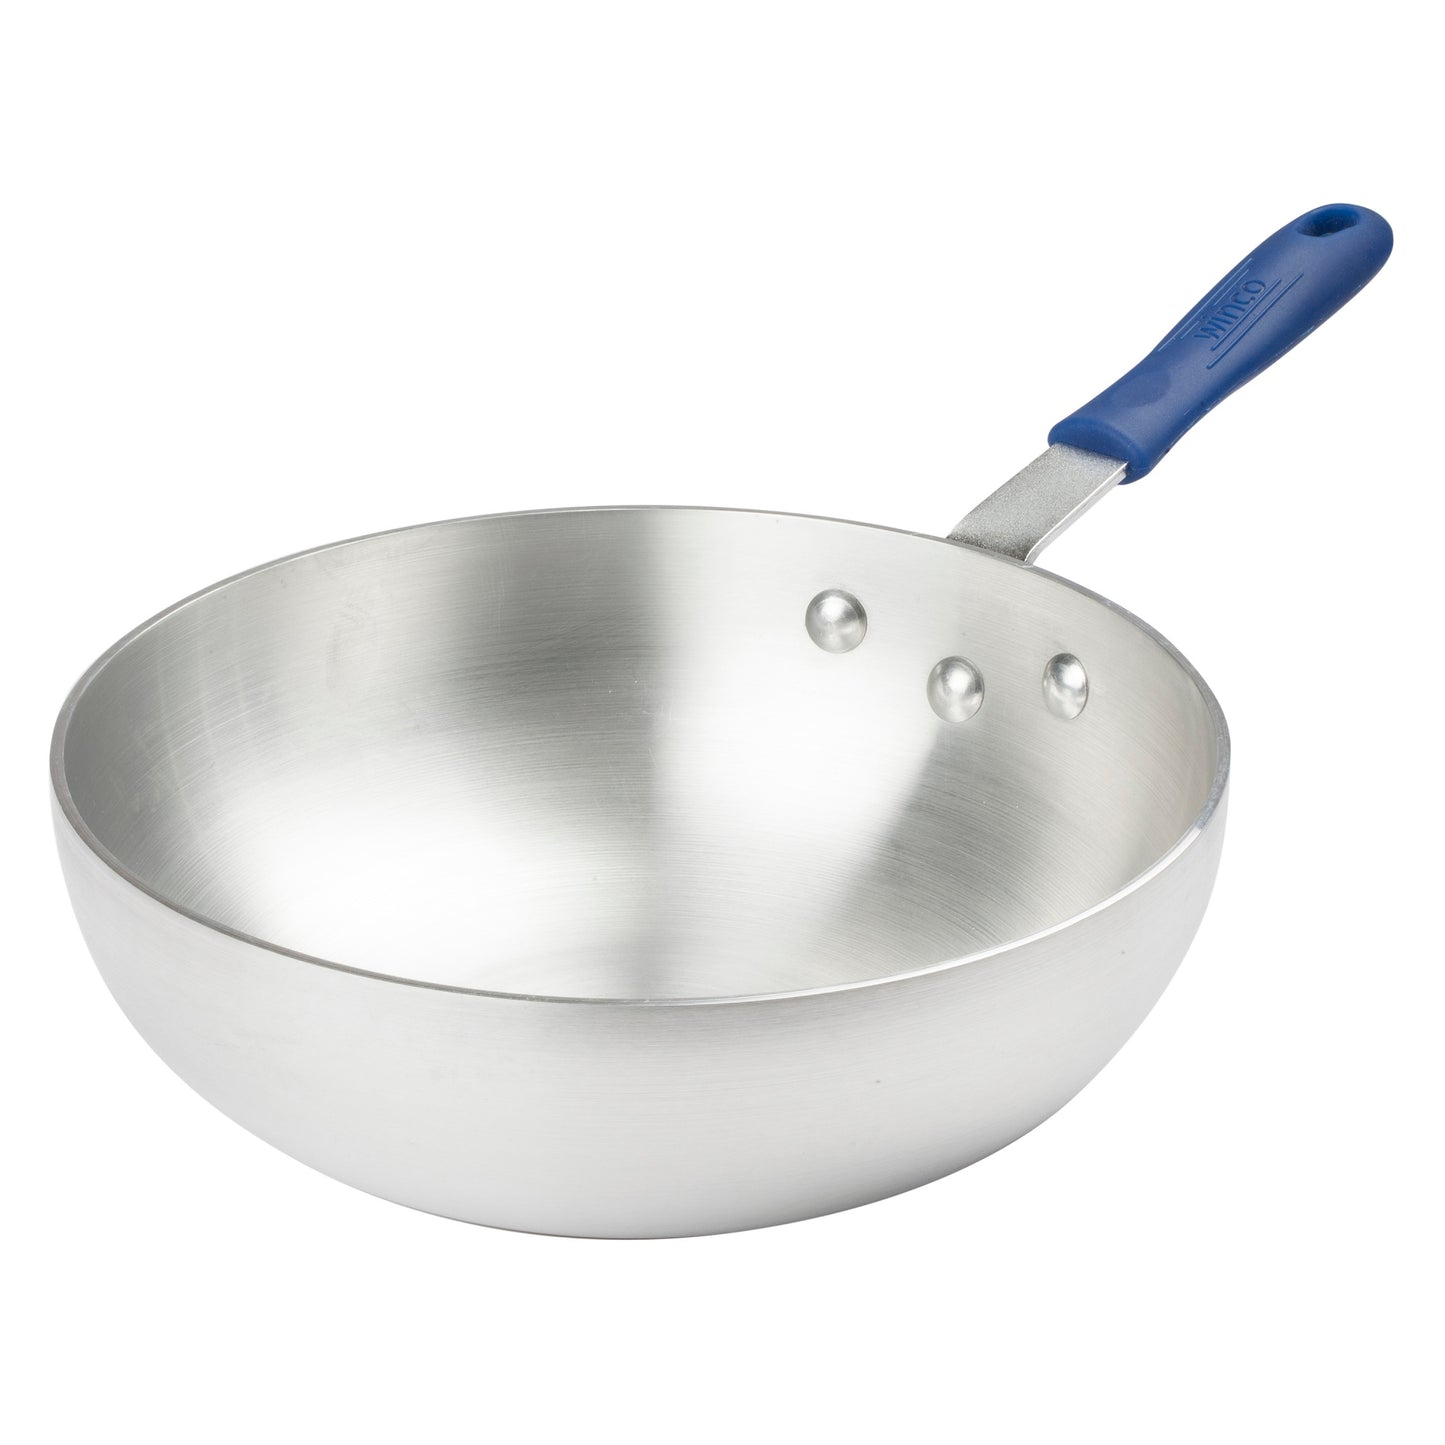 ASFP-11 - 11" Aluminum Stir Fry Pan with Silicone Sleeve